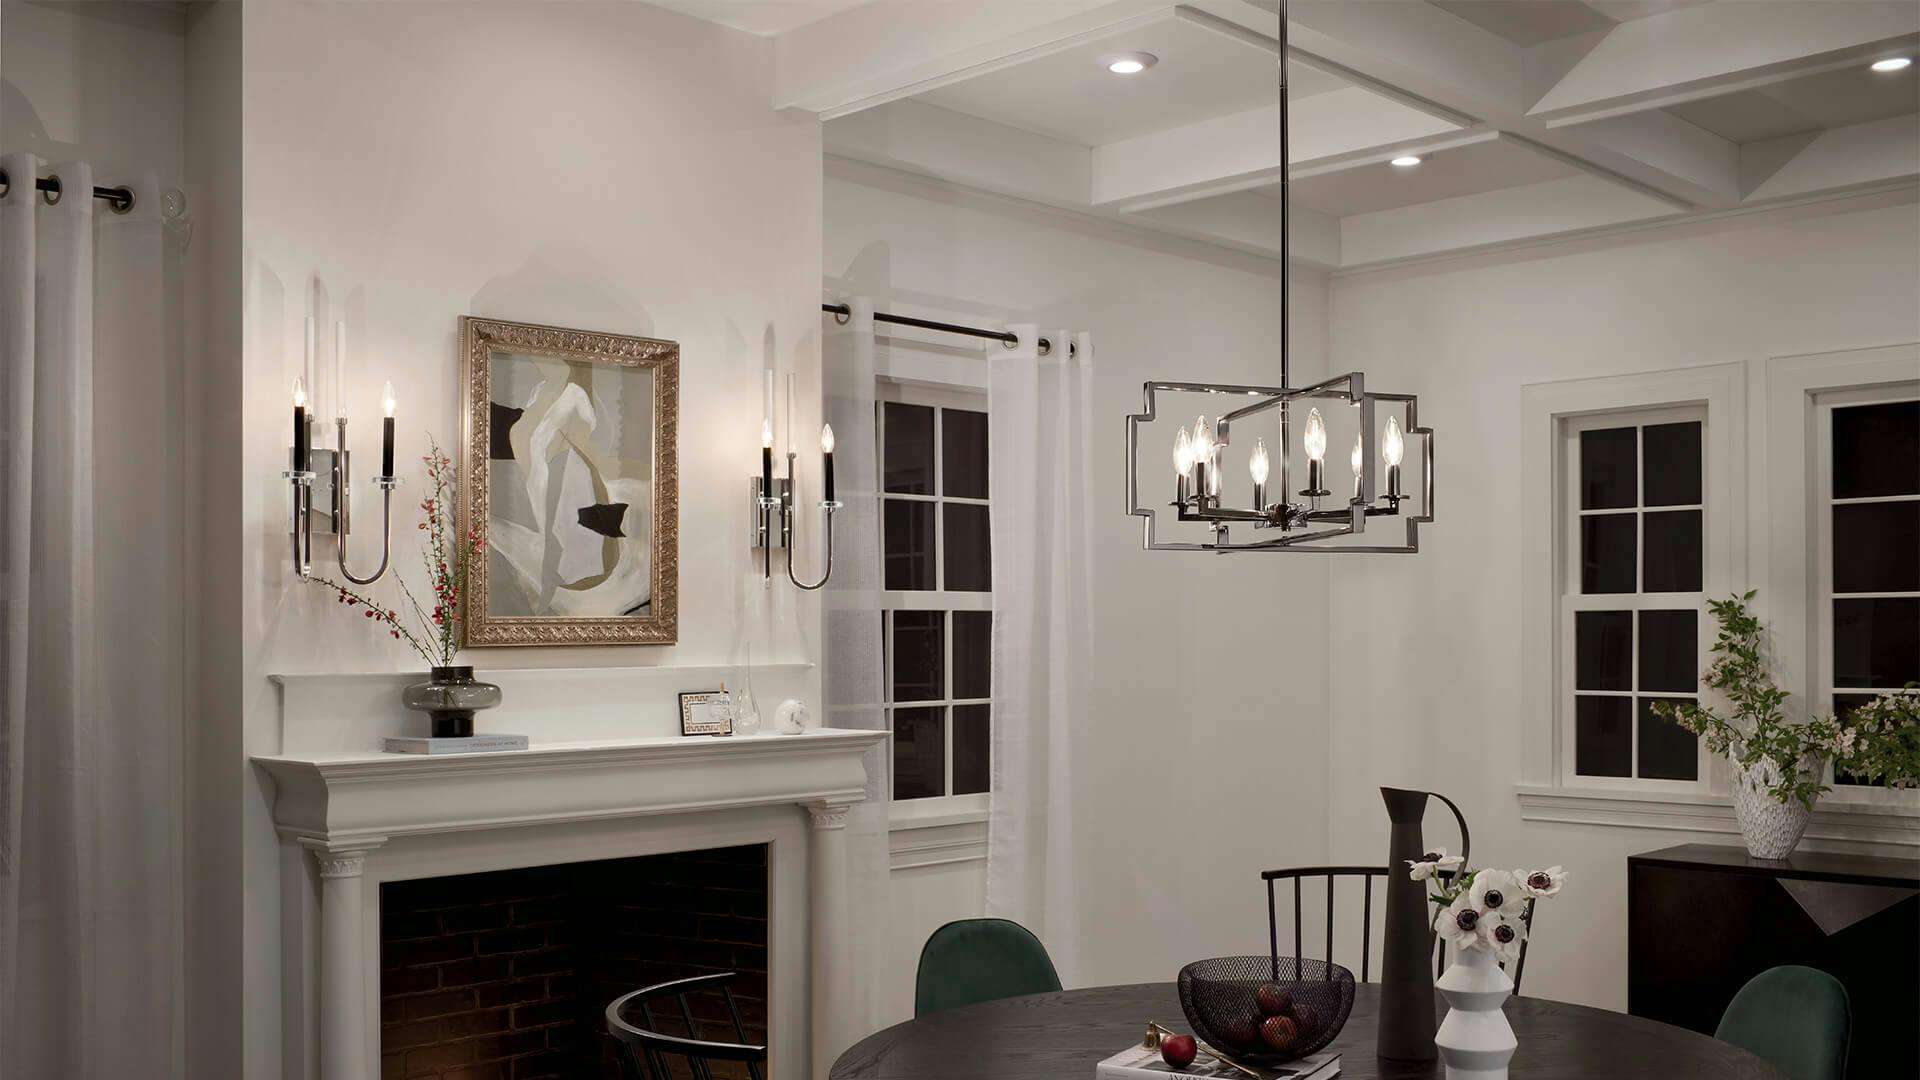 Modern dining room at night with Kadas wall sconces and Horizon chandelier